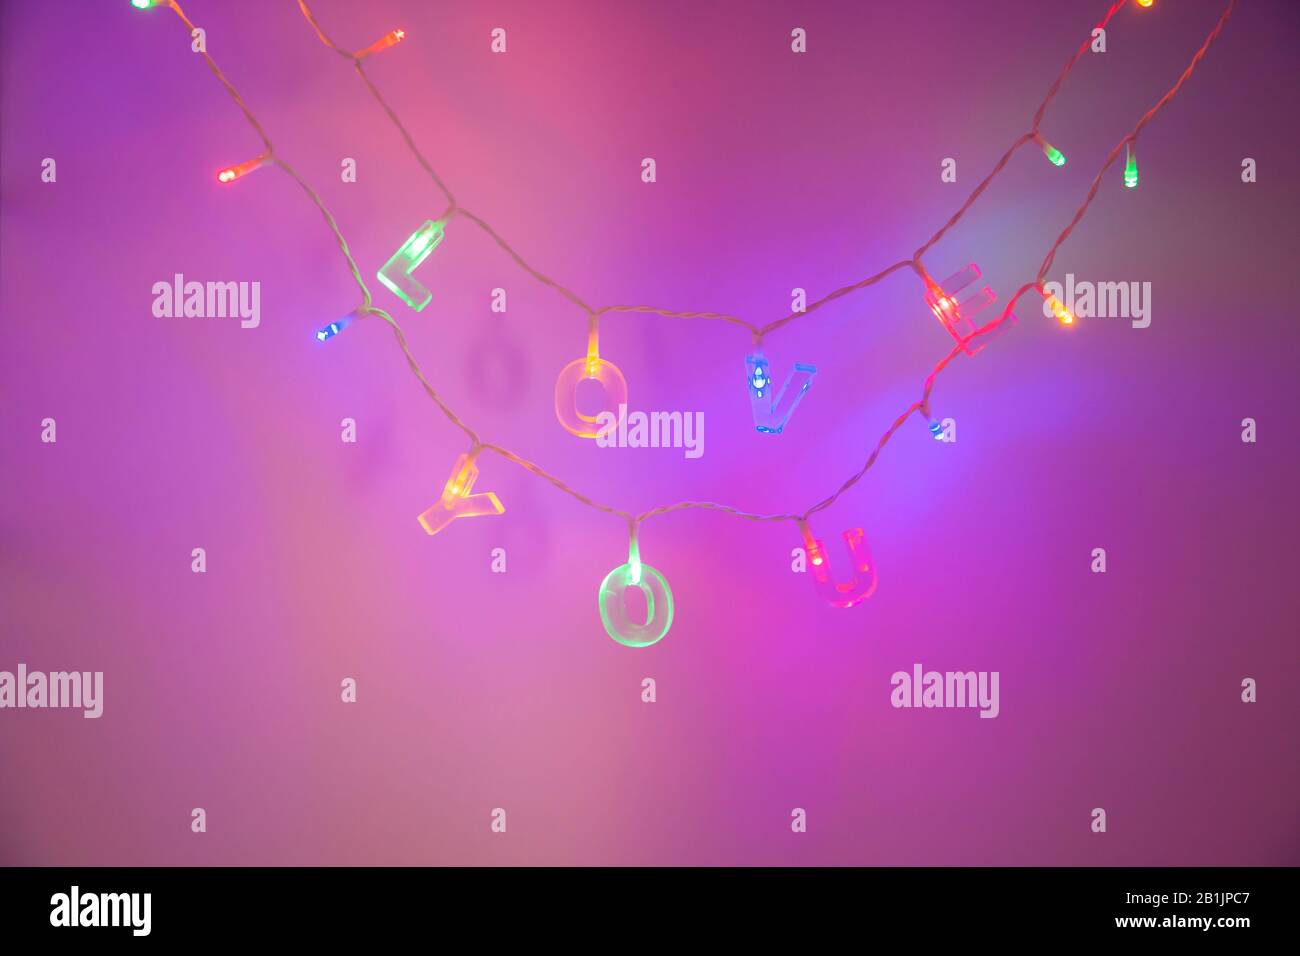 love you letters on a string of lights with purple neon light background Stock Photo